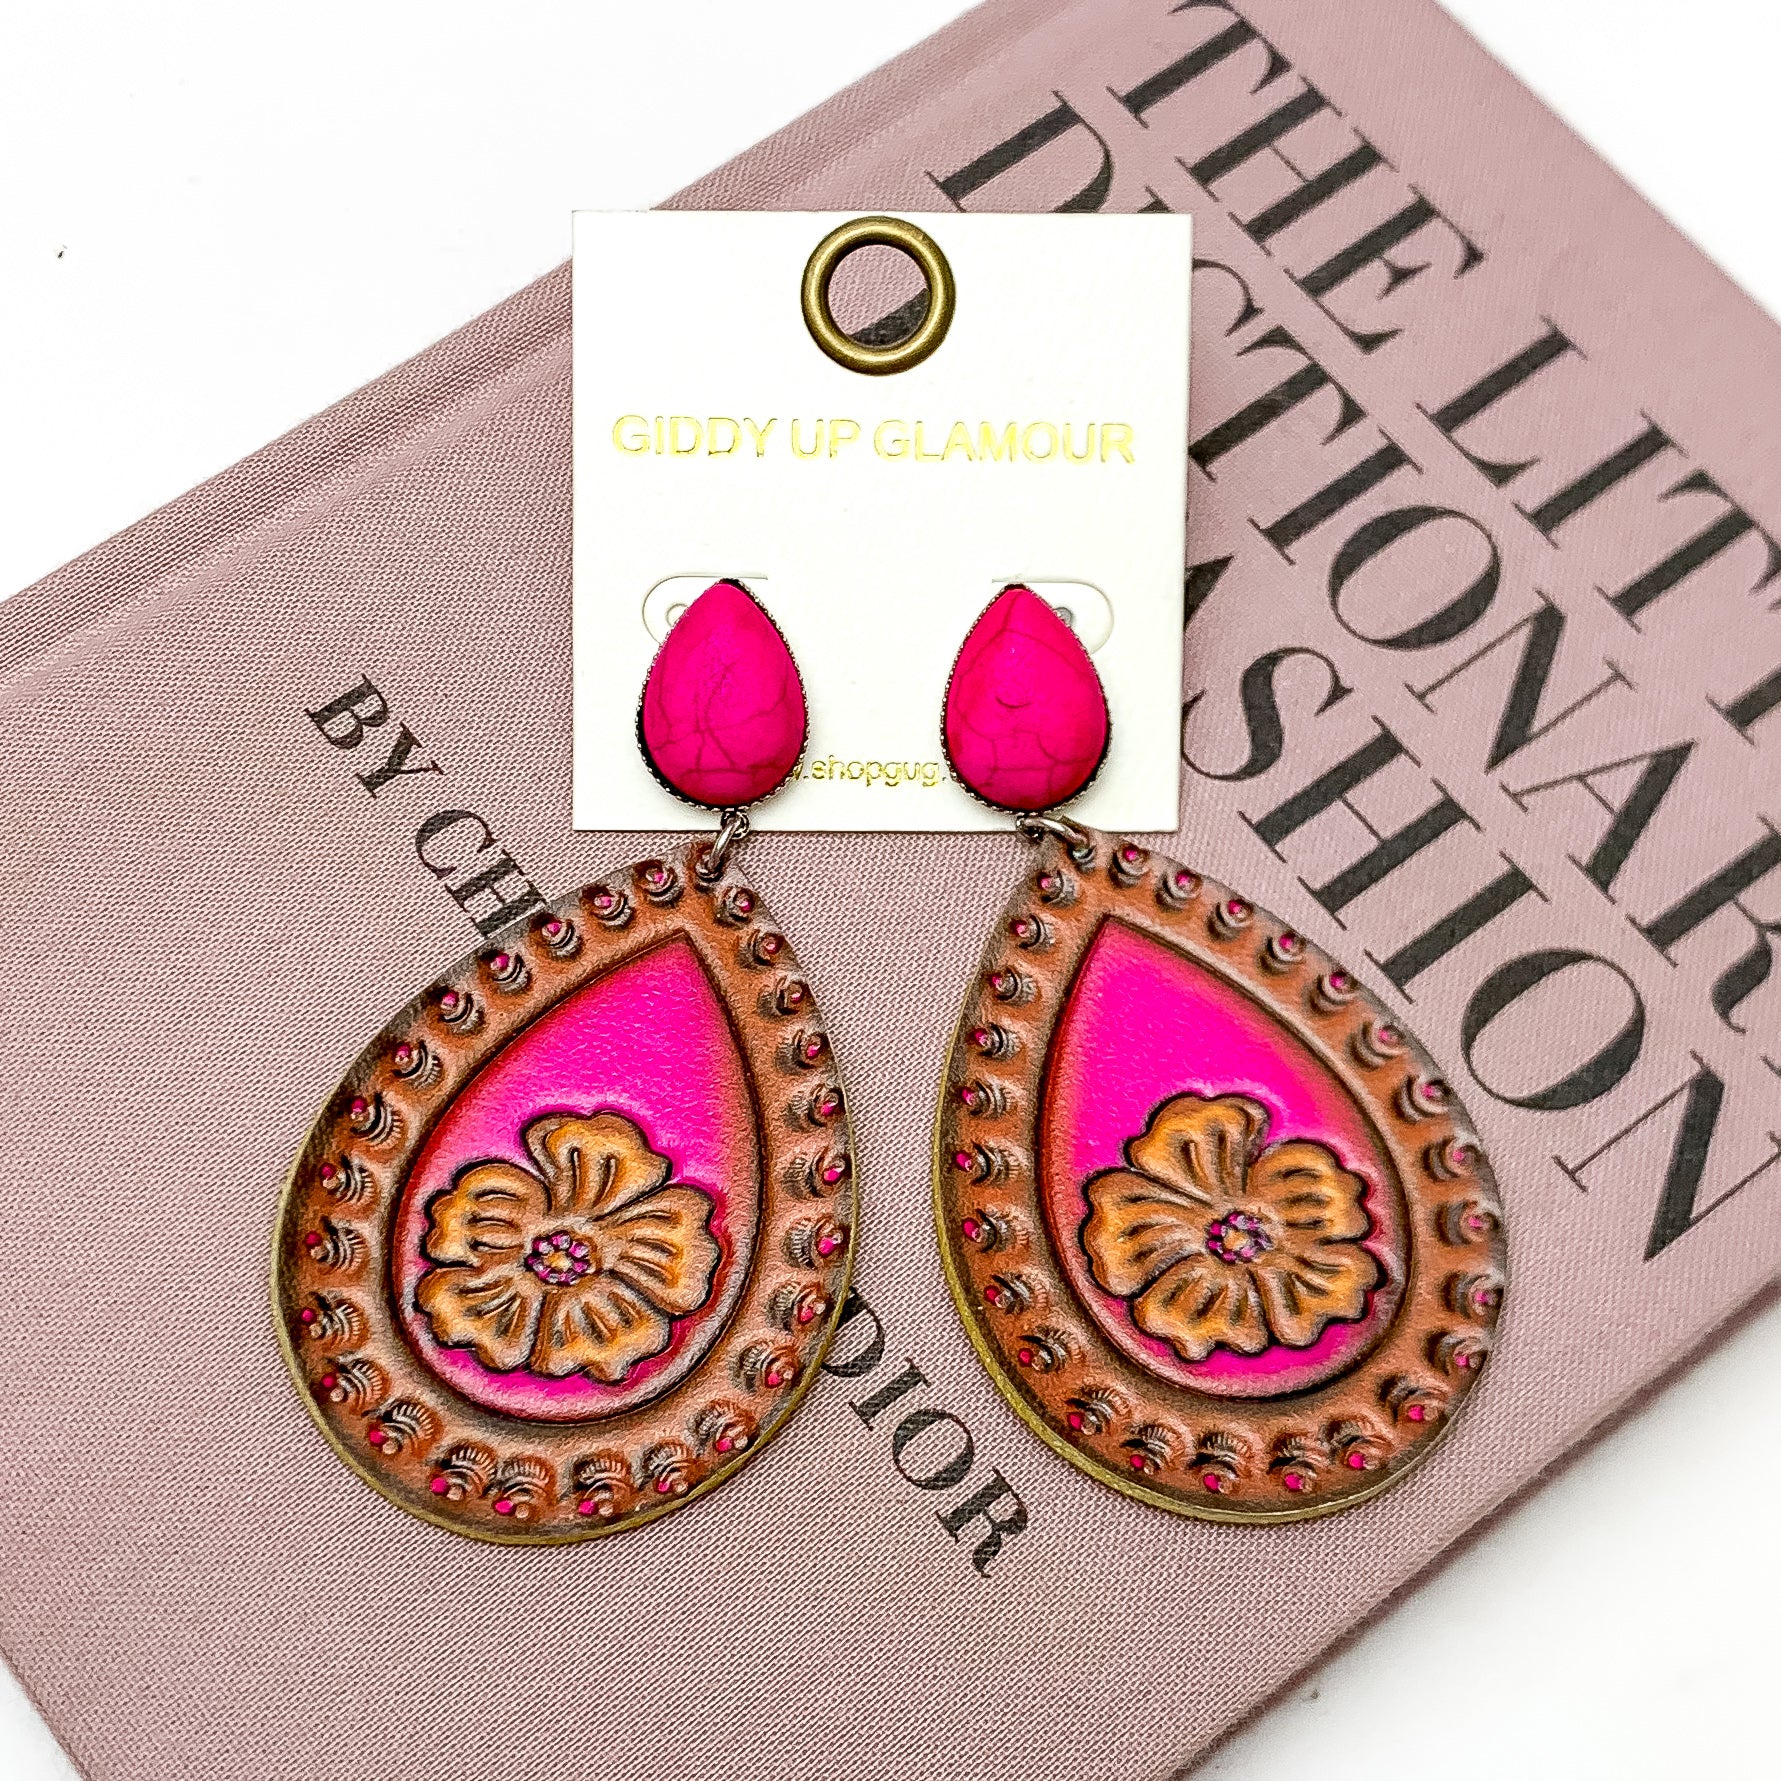 Stone Post Earrings with Flower Tooled Brown Leather Teardrop in Hot Pink - Giddy Up Glamour Boutique